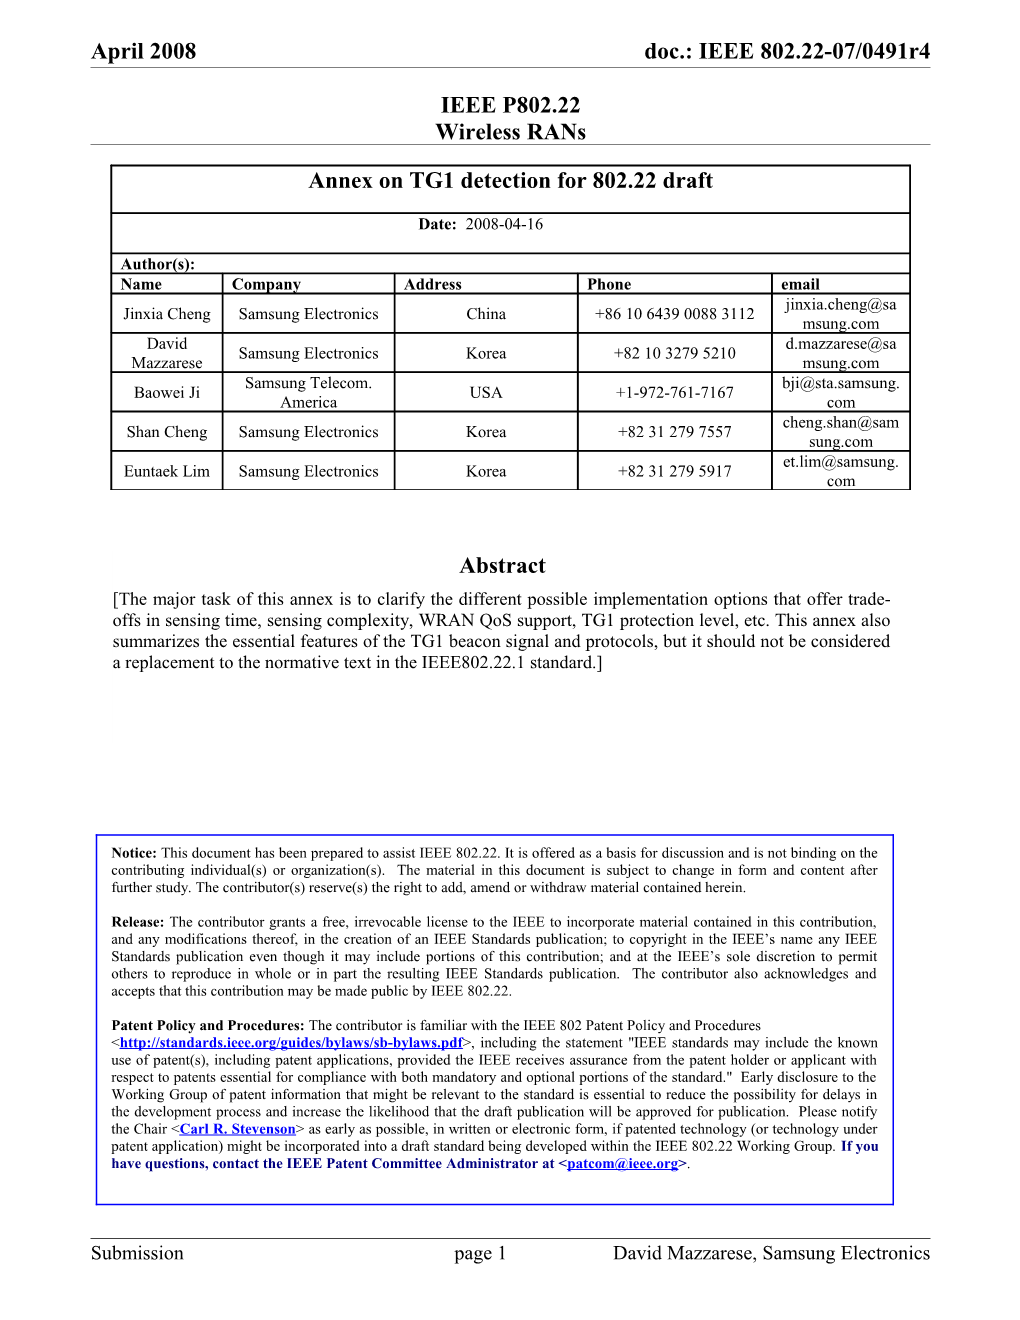 1. Summary of the Characteristics of the IEEE802.22.1 Beacon Signal and Protocols